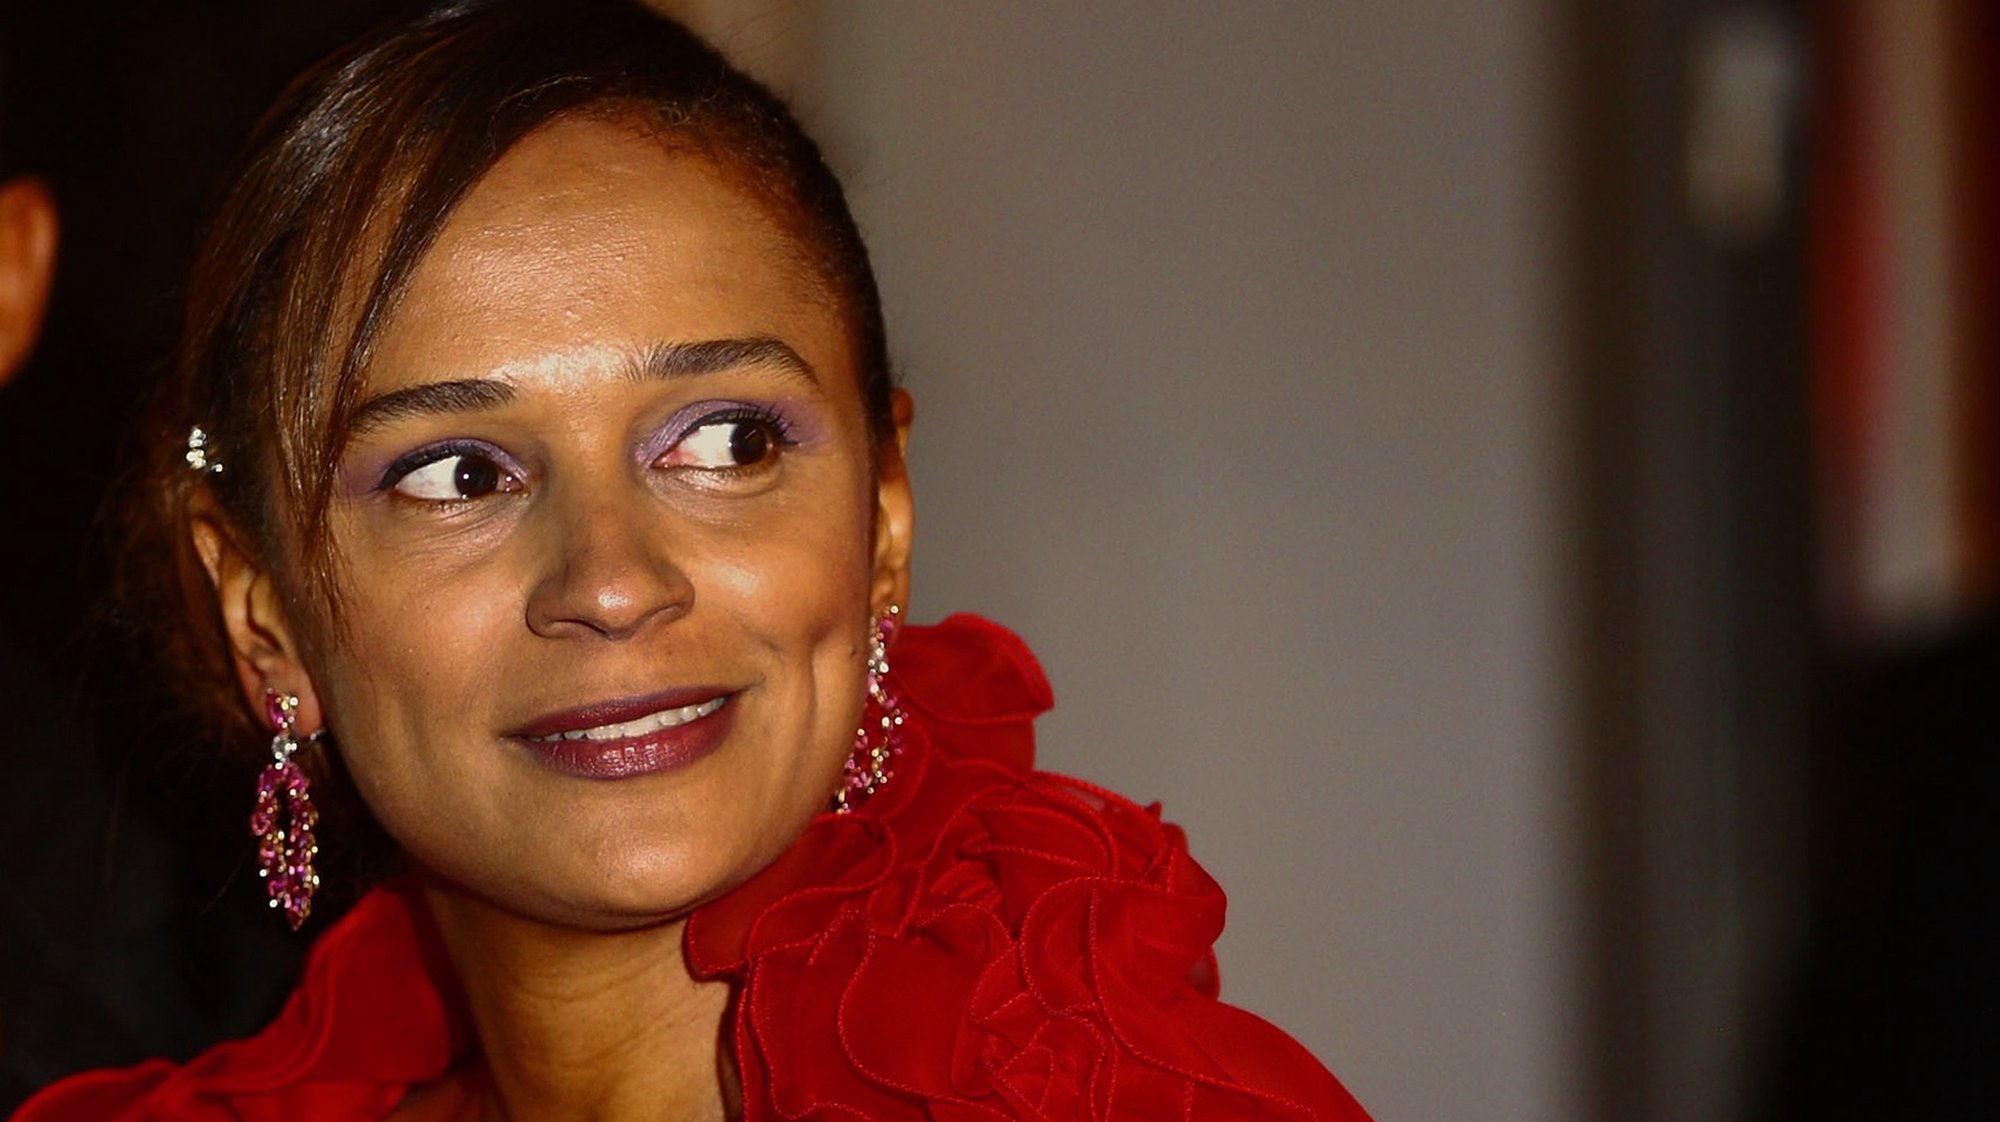 epa08096297 (FILE) - Isabel dos Santos in Luanda, Angola, 05 November 2011 (reissued 31 December 2019). A court in Angola has frozen the assets of Isabel dos Santos, the oldest daughter of former Angolan President Jose Eduardo dos Santos, on corruption charges.  EPA/BRUNO FONSECA *** Local Caption *** 50687721